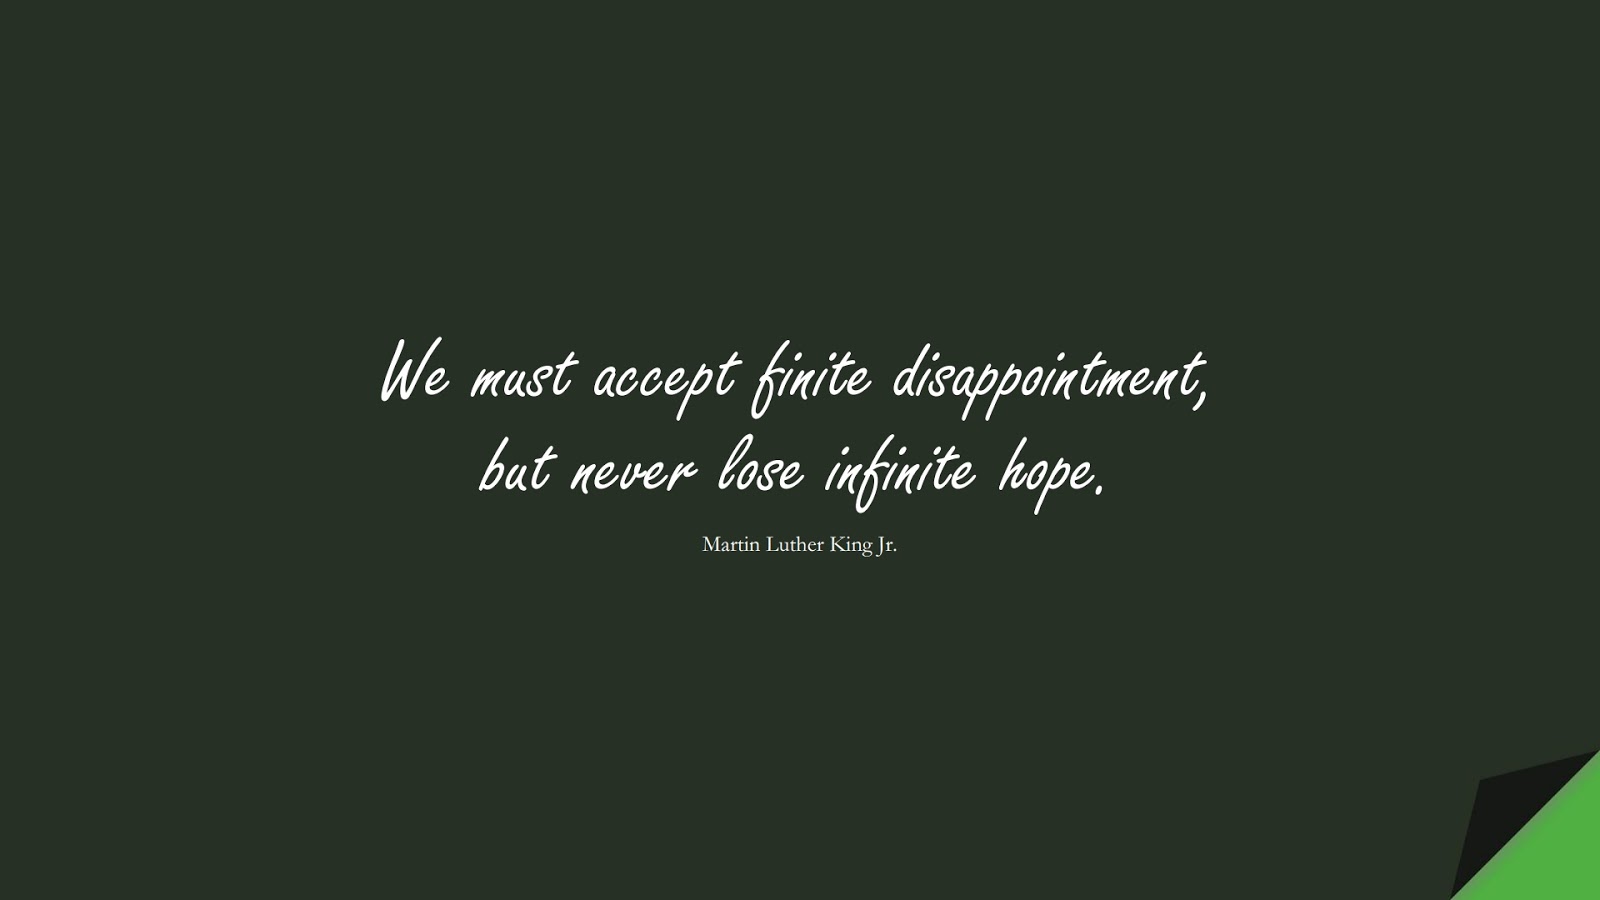 We must accept finite disappointment, but never lose infinite hope. (Martin Luther King Jr.);  #ShortQuotes